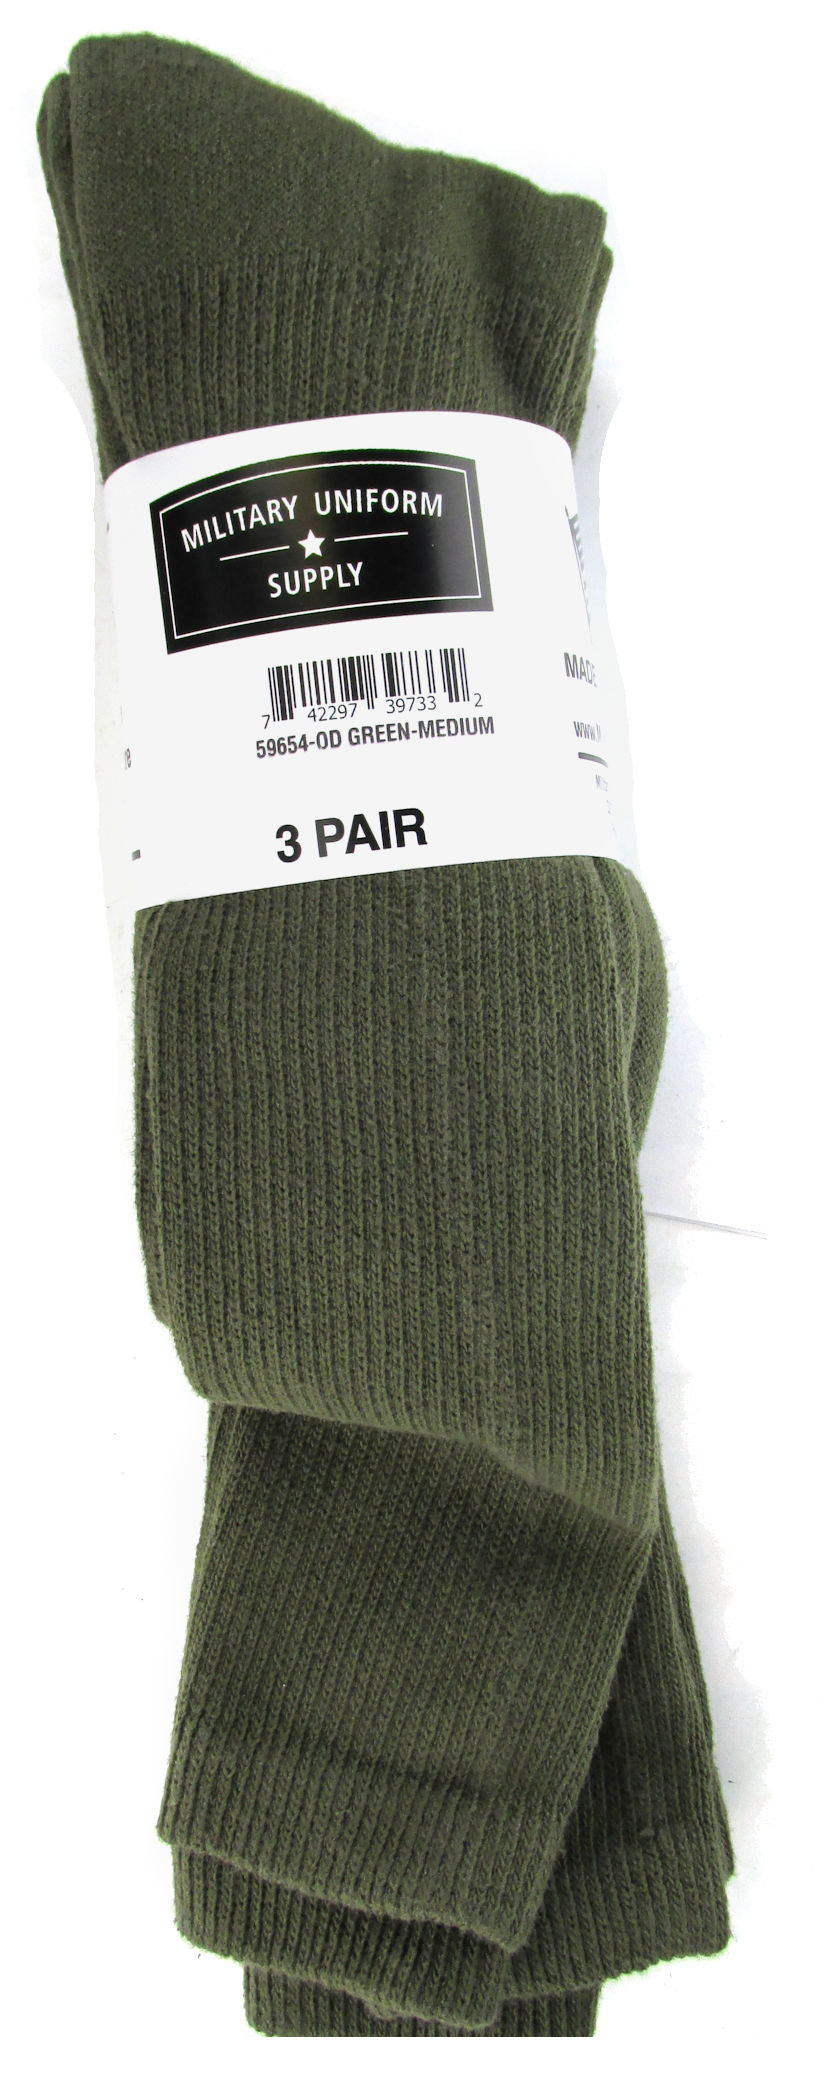 Military Style Men's Anti-Microbial Boot Socks - OLIVE DRAB - 3 PAIR